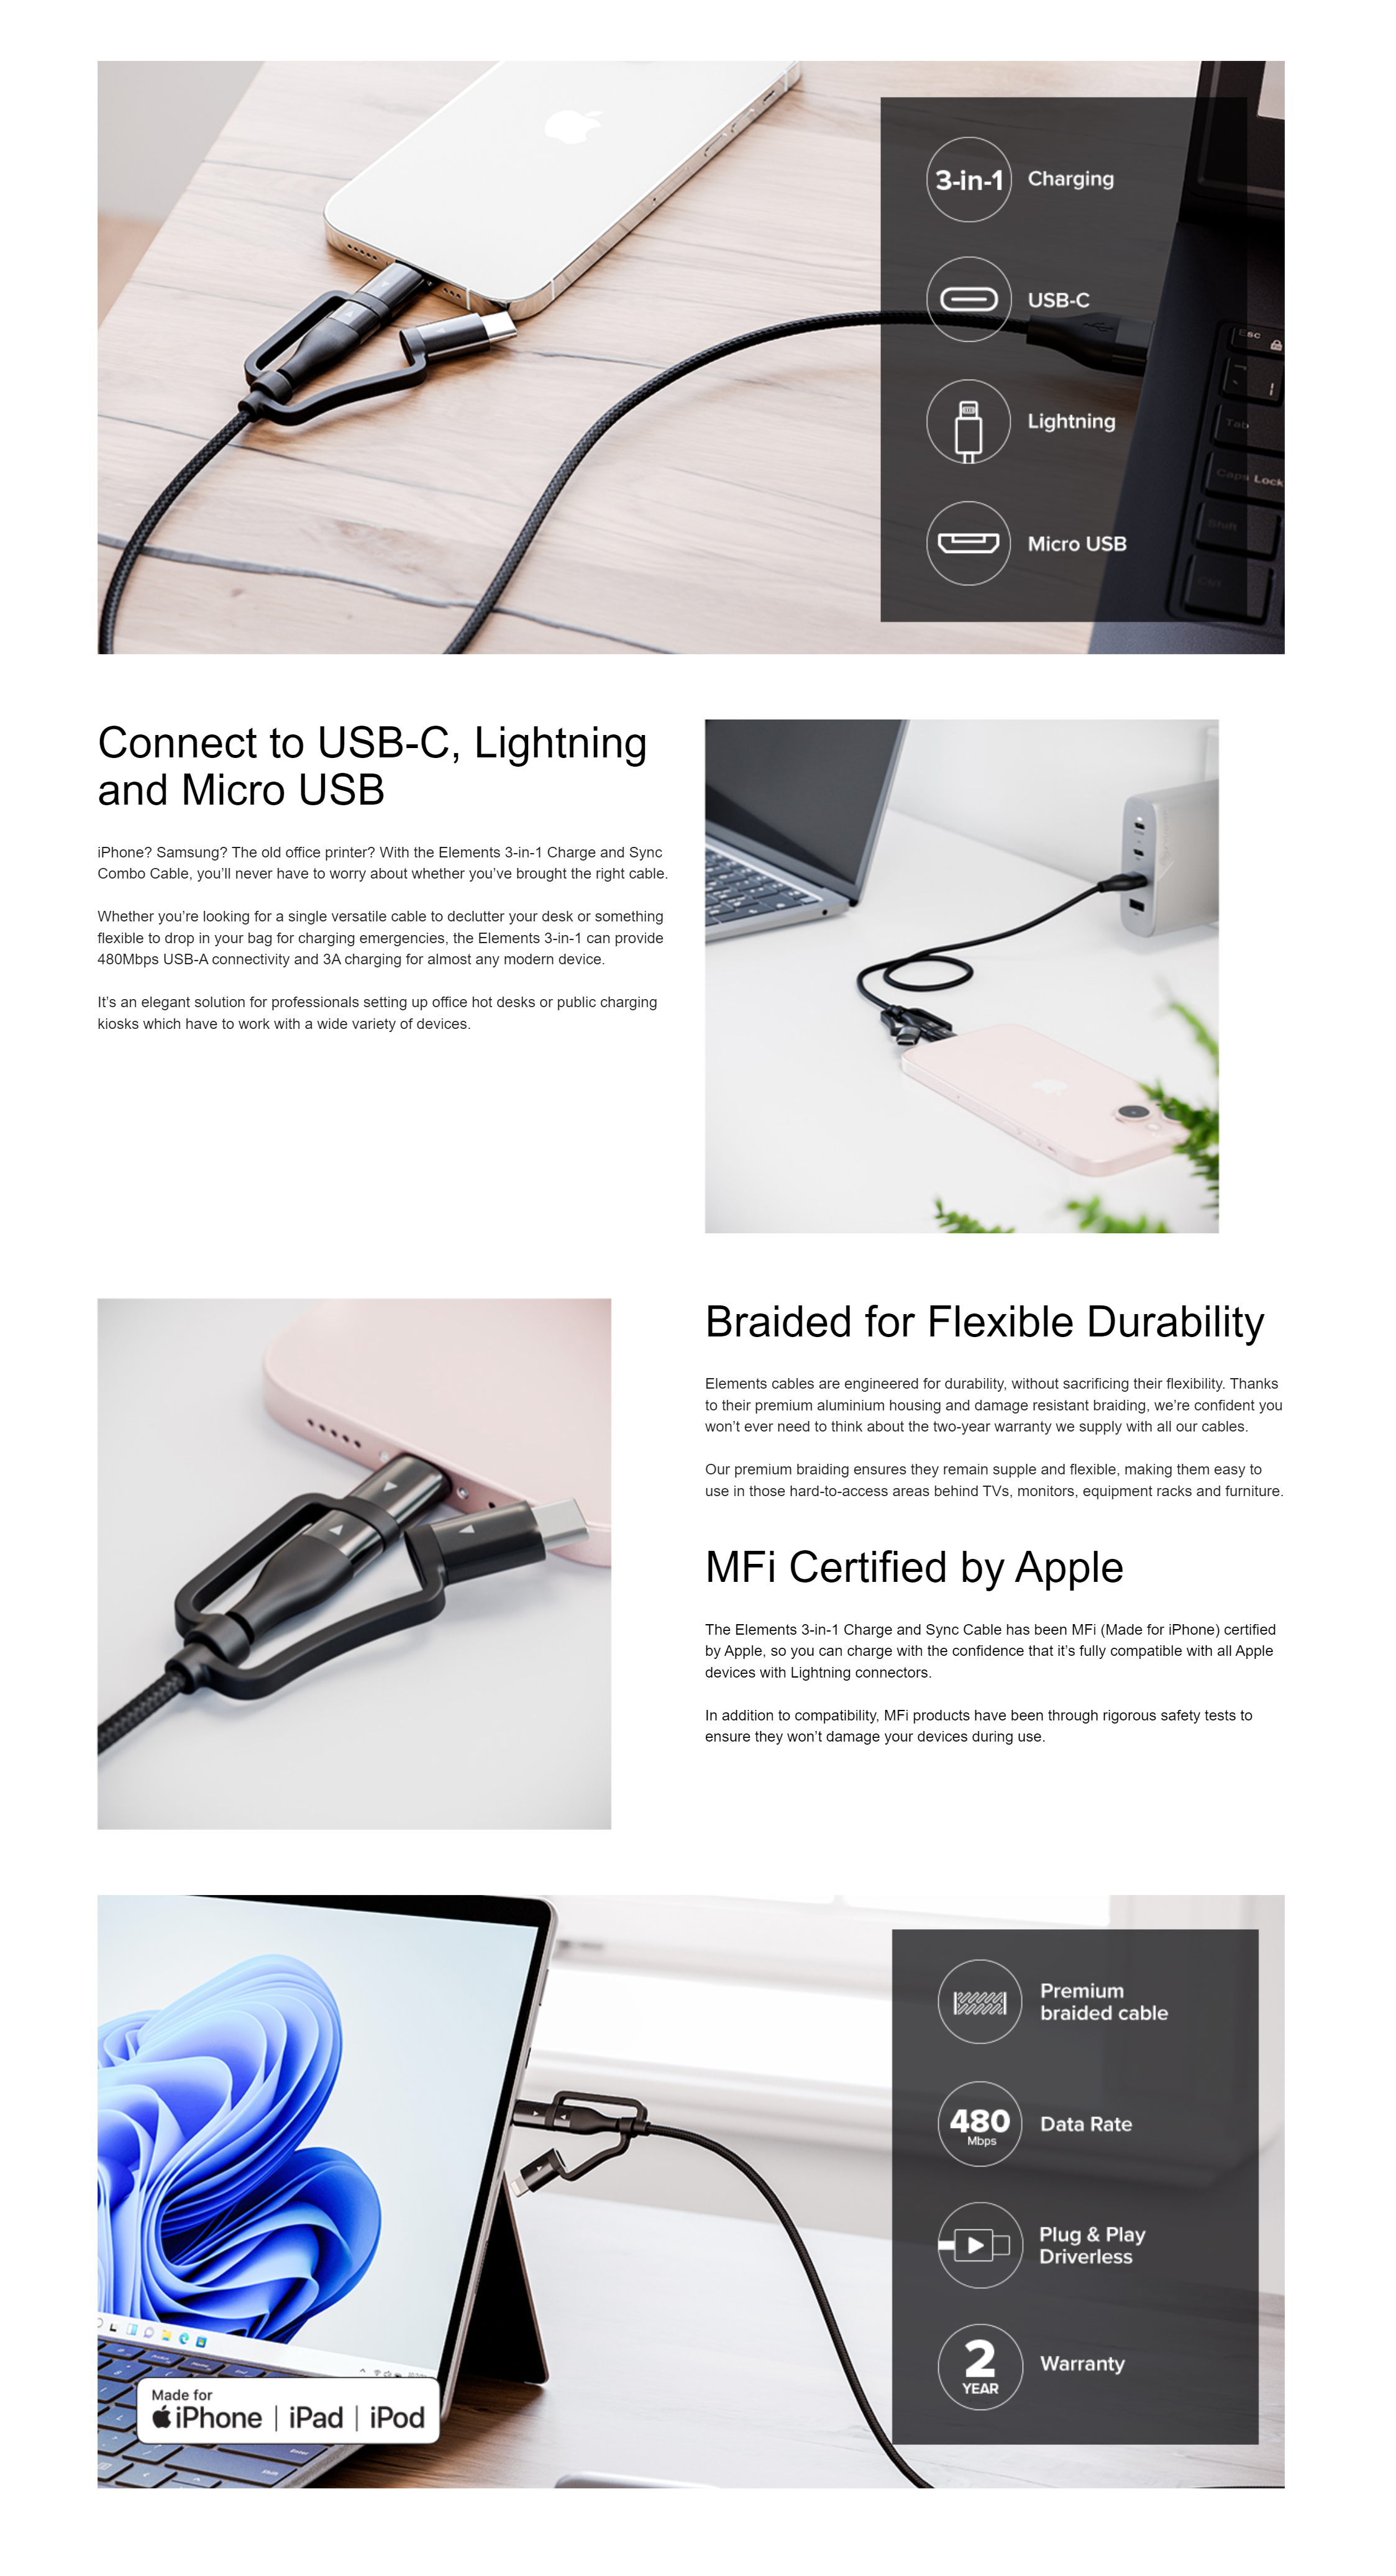 A large marketing image providing additional information about the product ALOGIC Elements 3-in-1 Charge and Sync Combo Cable - 1m - Additional alt info not provided